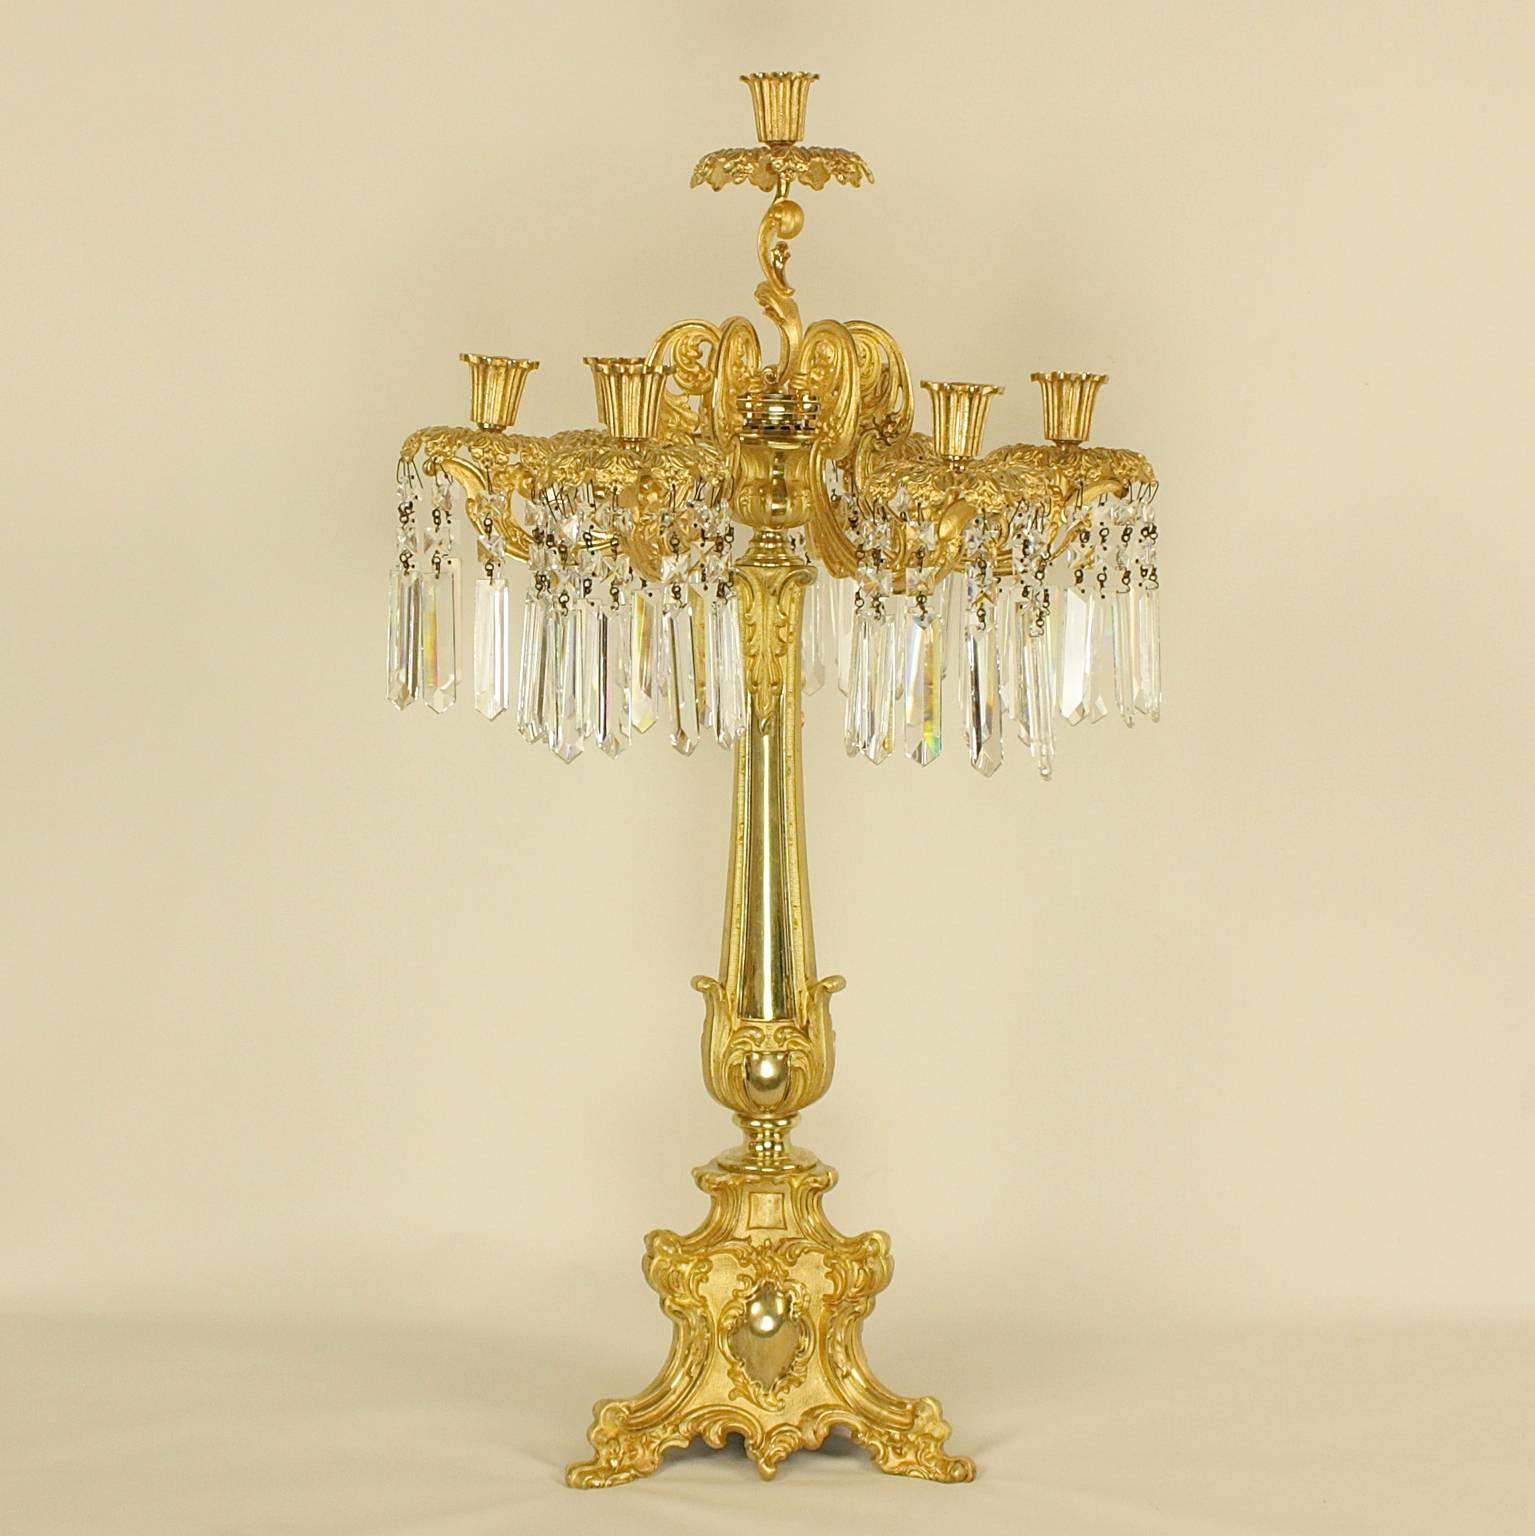 A pair of 19th century English gilt bronze cut-crystal candelabra each  stamped 'Abbott' on the underside of the base. Thomas Abbott was a designer, bronzier and lamp maker from Birmingham, active between 1830 and 1860. His workshop is known for its